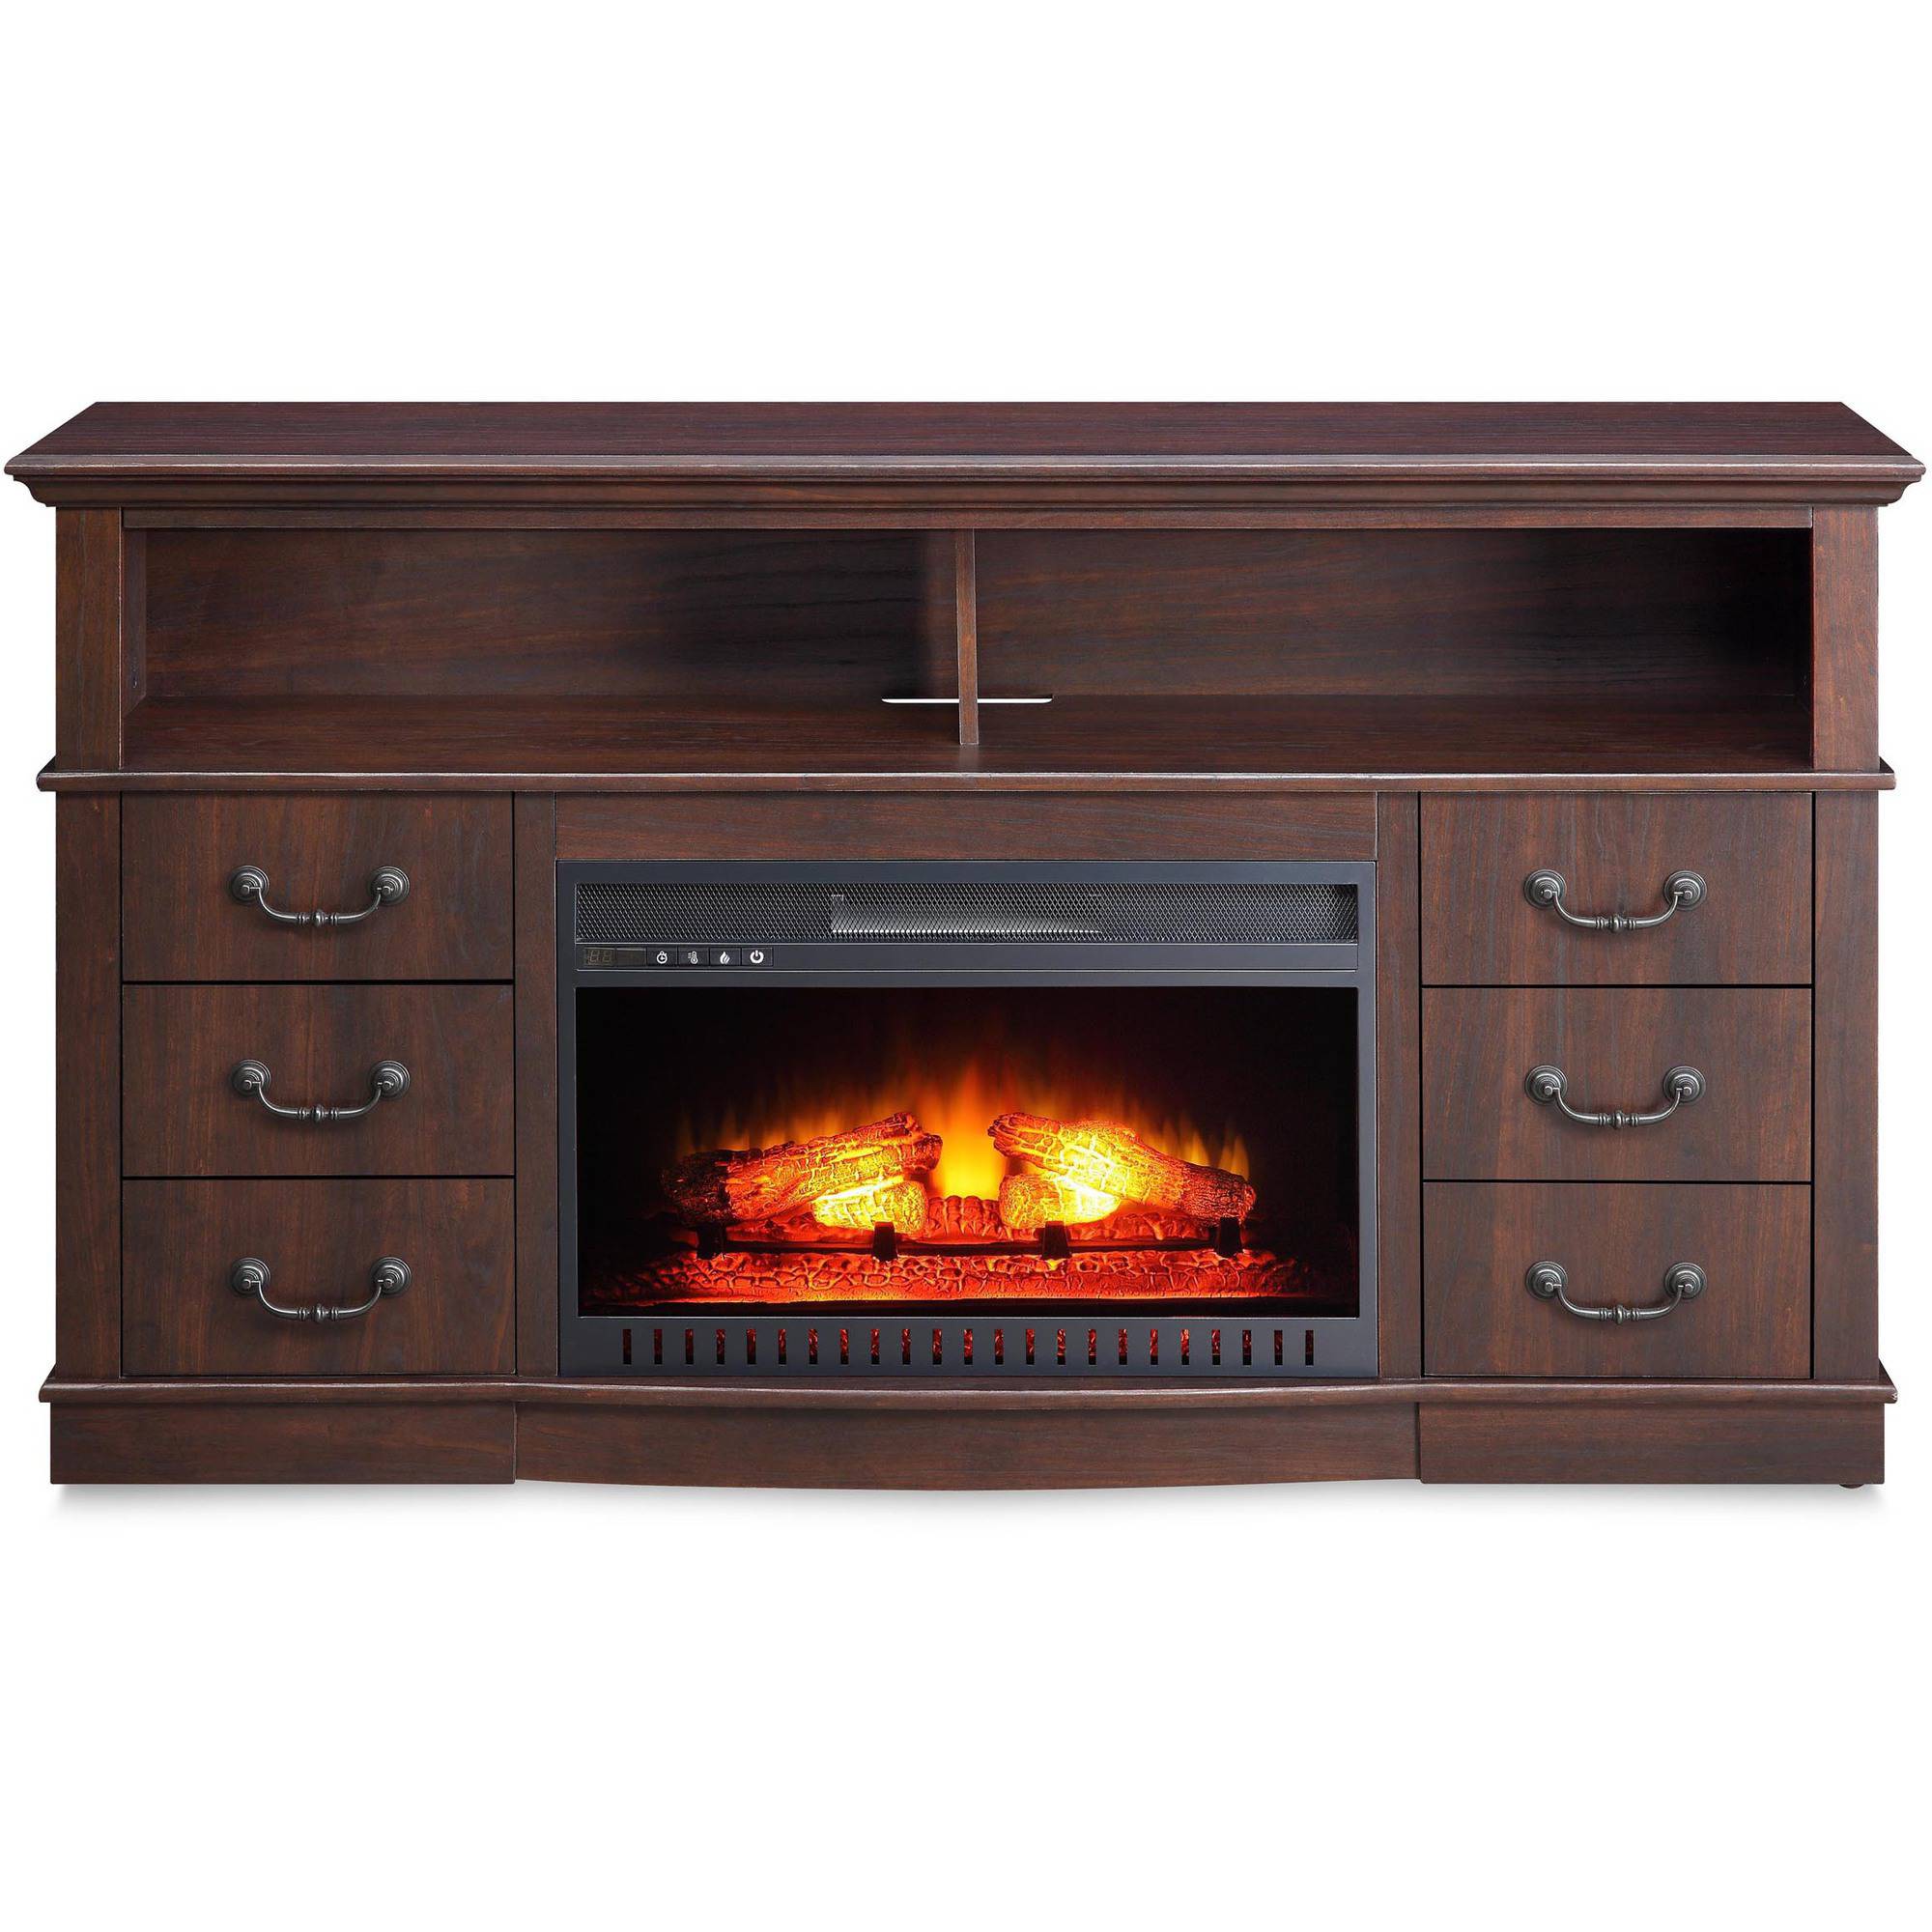 Better Homes & Gardens Media Fireplace Console for TVs up to 70" - image 4 of 6